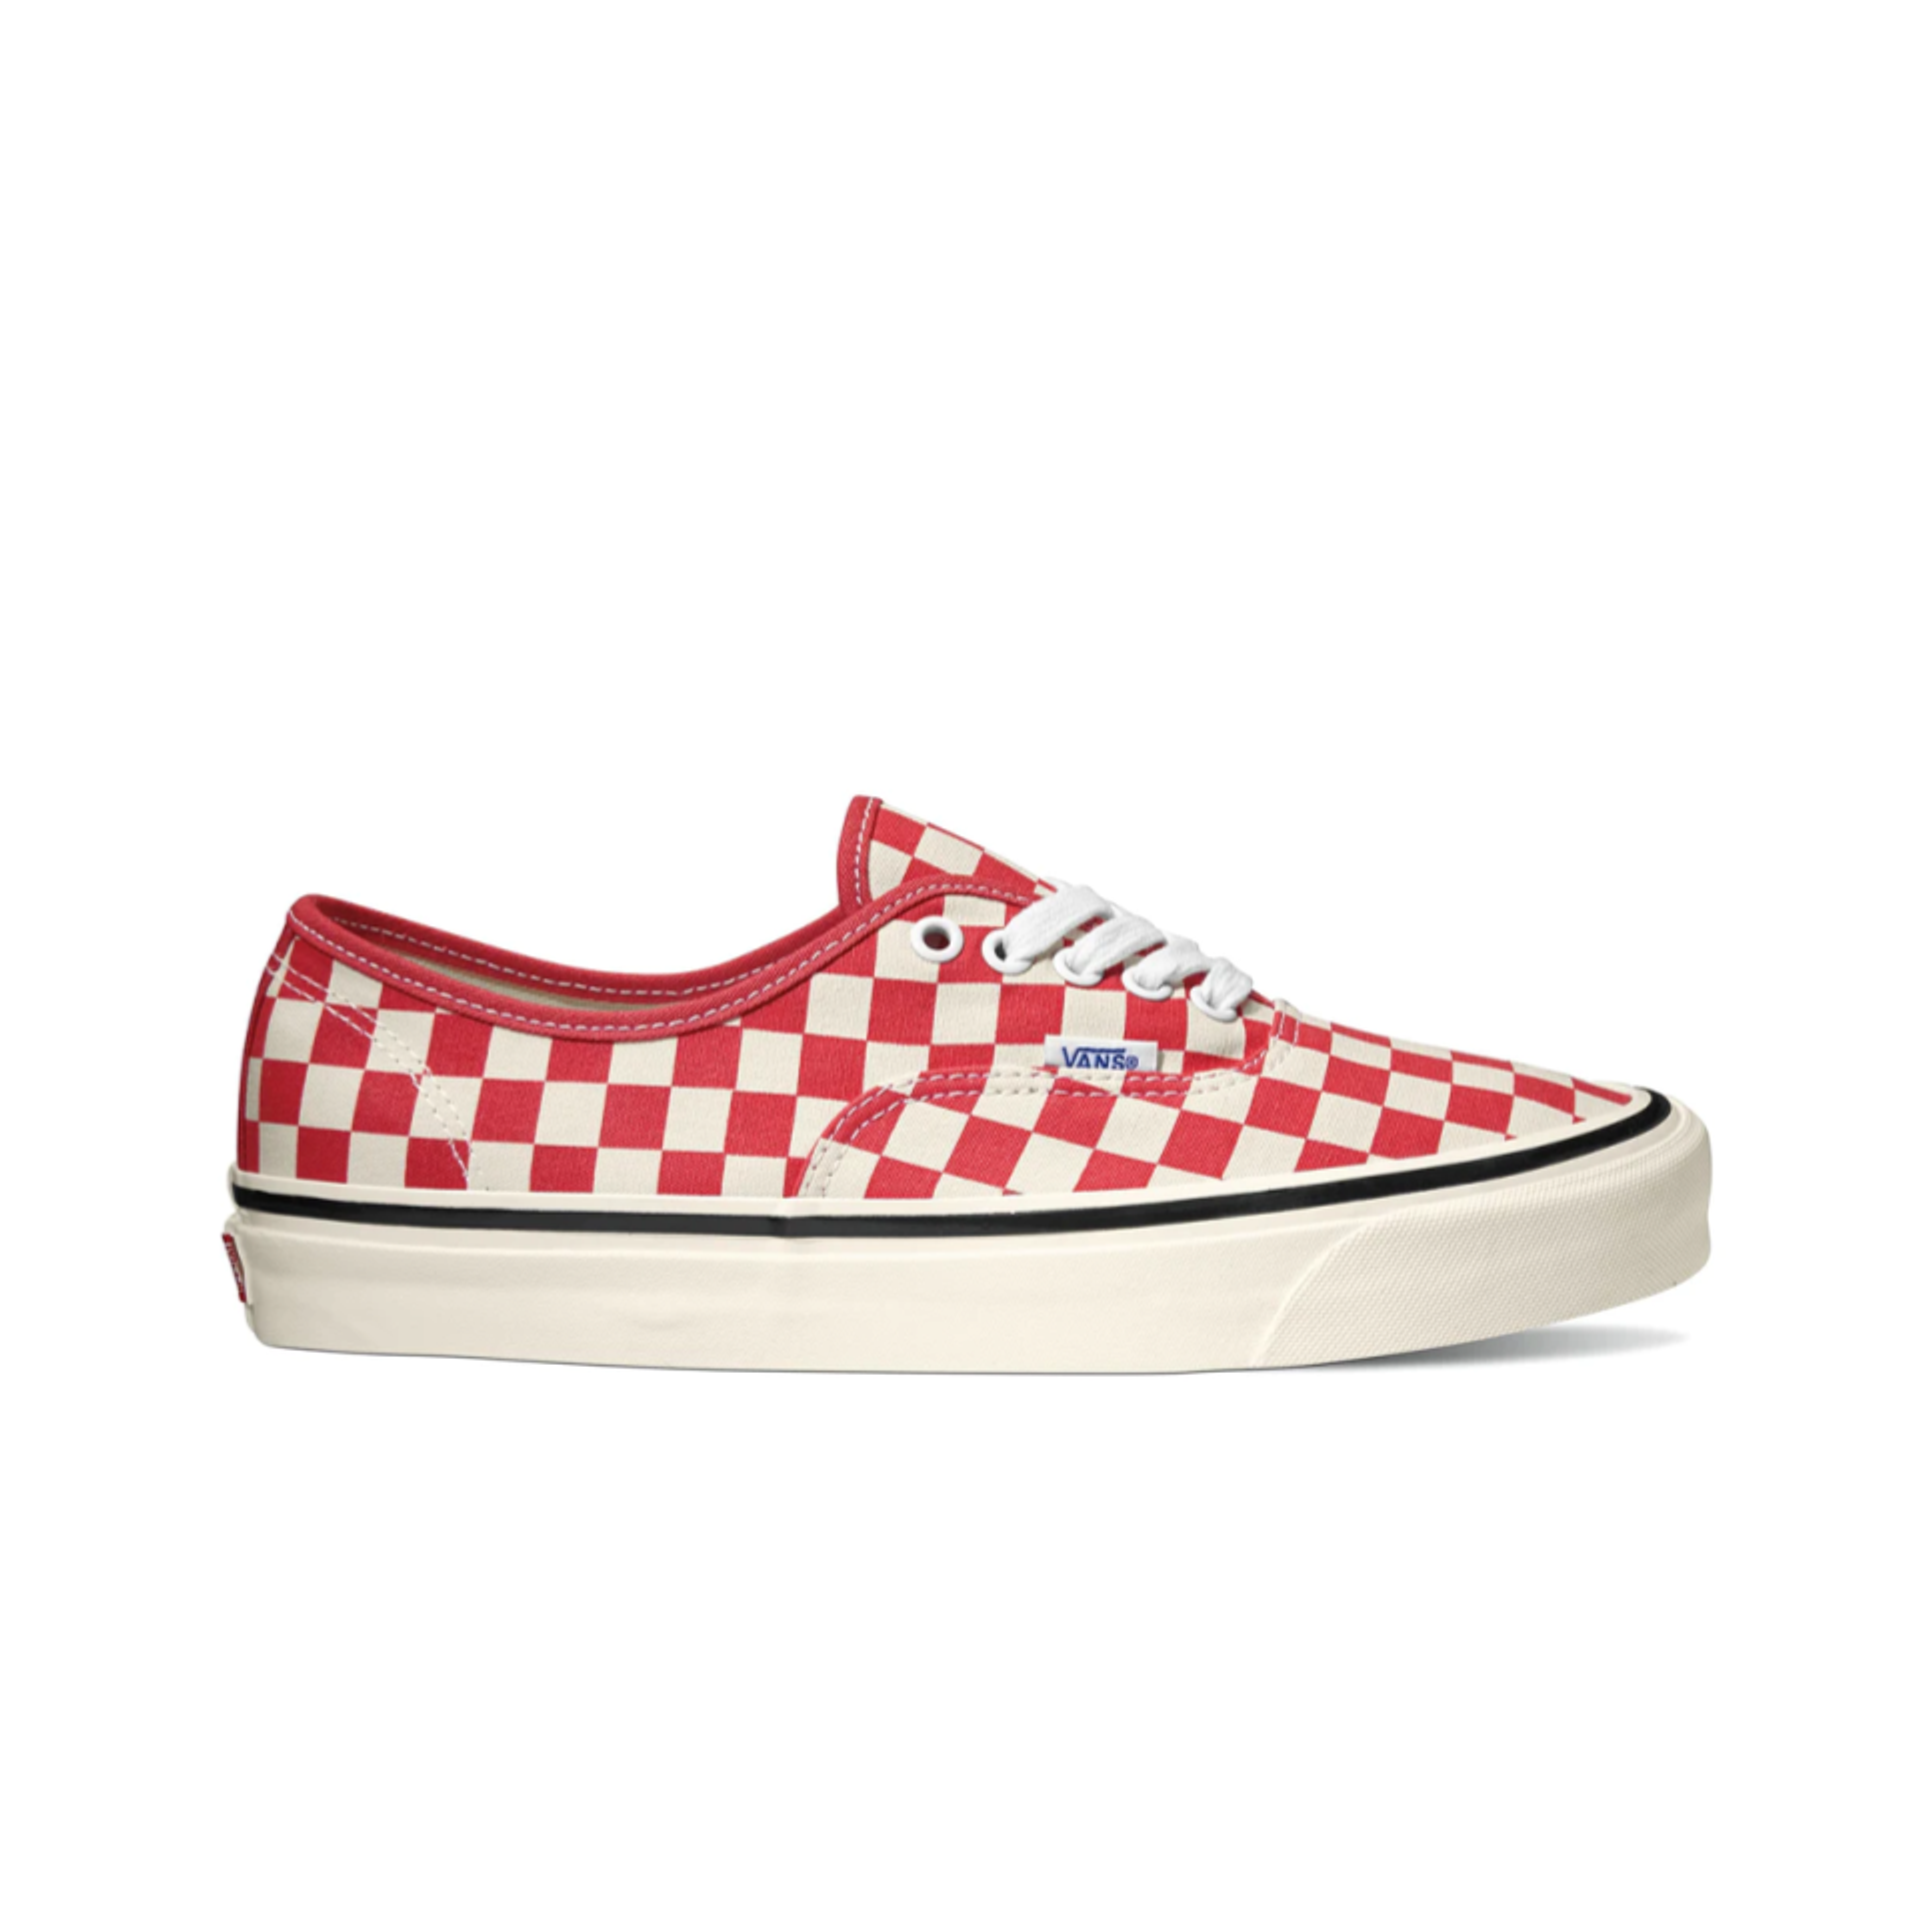 Vans Anaheim Factory Authentic 44 Dx Shoes Red Checker